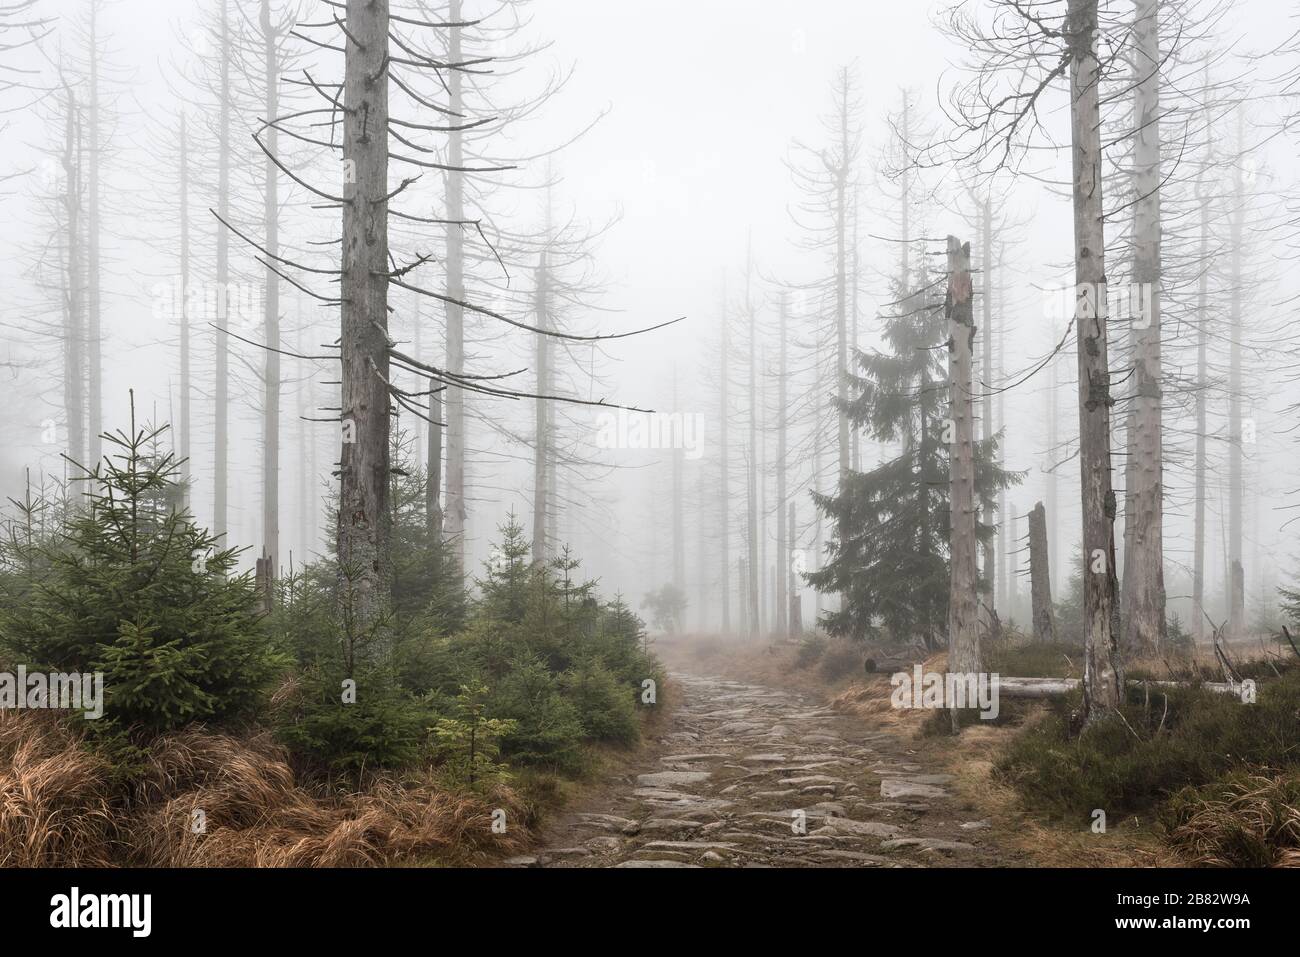 Kaiserweg, hiking trail through misty dead forest, dead due to drought and bark beetle infestation, Harz National Park, Lower Saxony, Germany Stock Photo